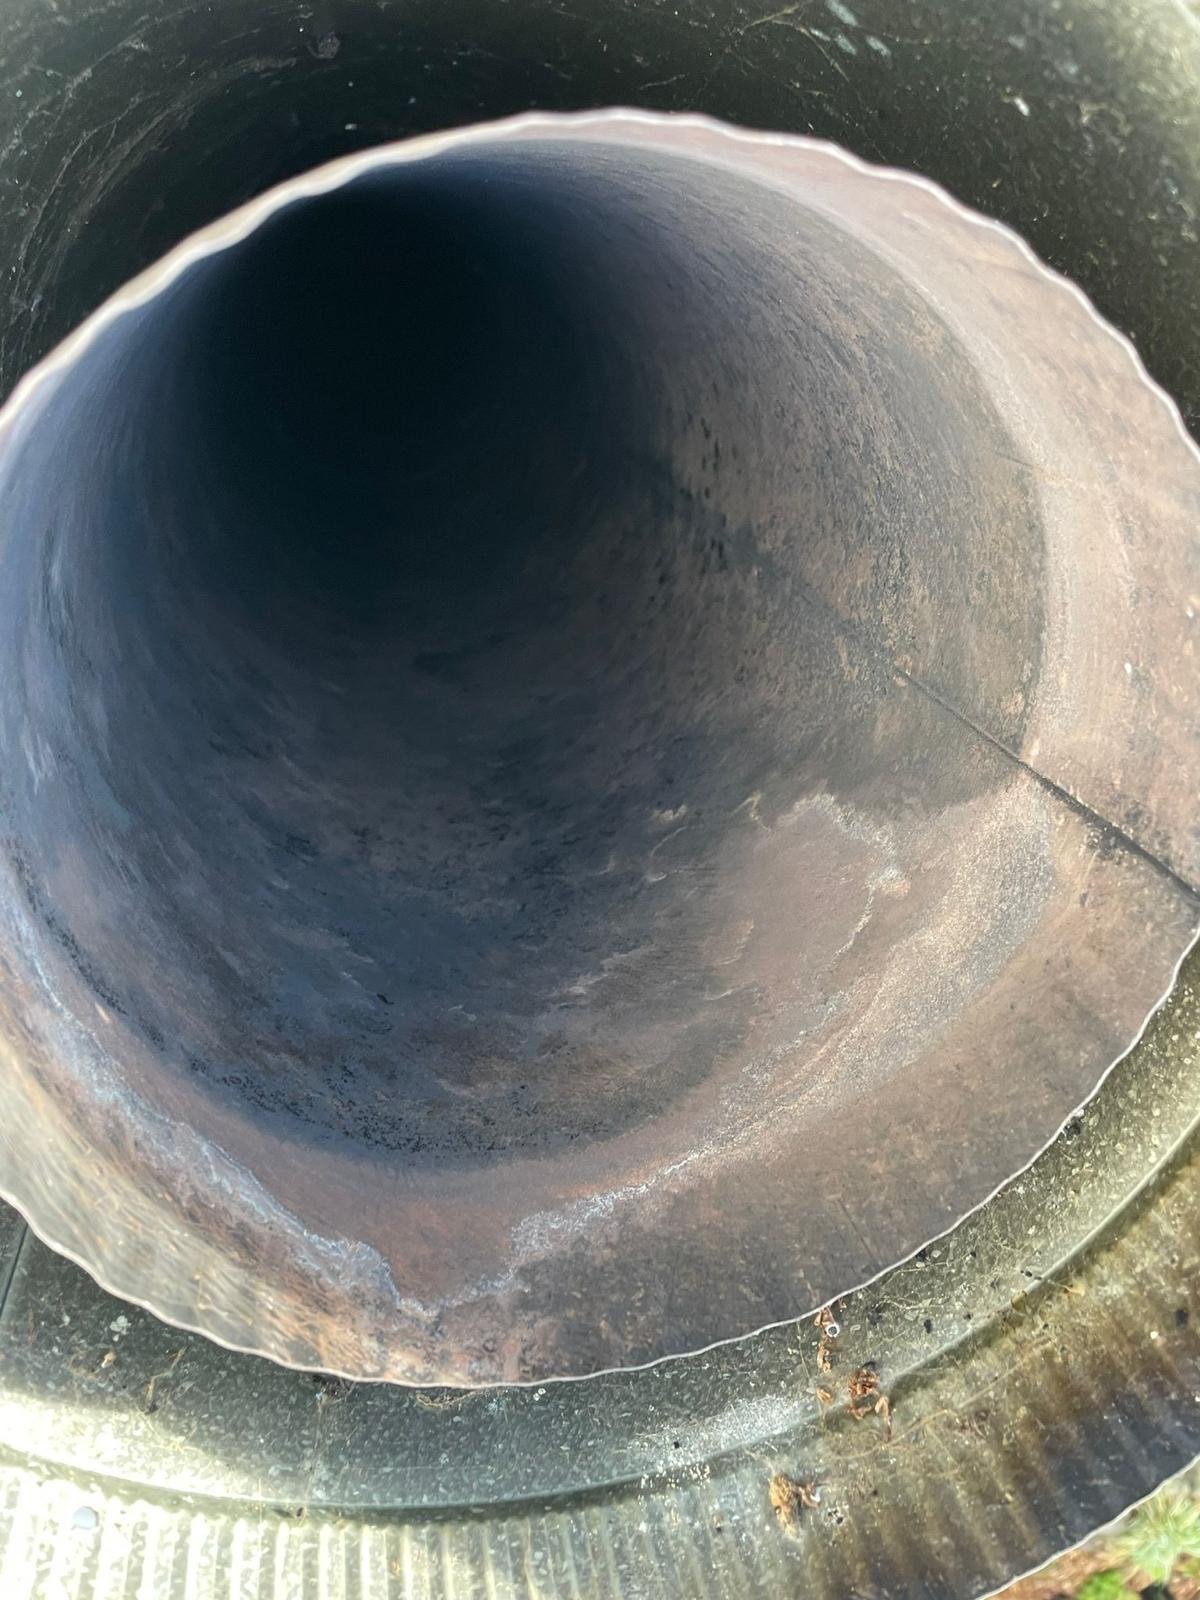 FreshDuct Cleaning A Chimney Flue In Melbourne - After